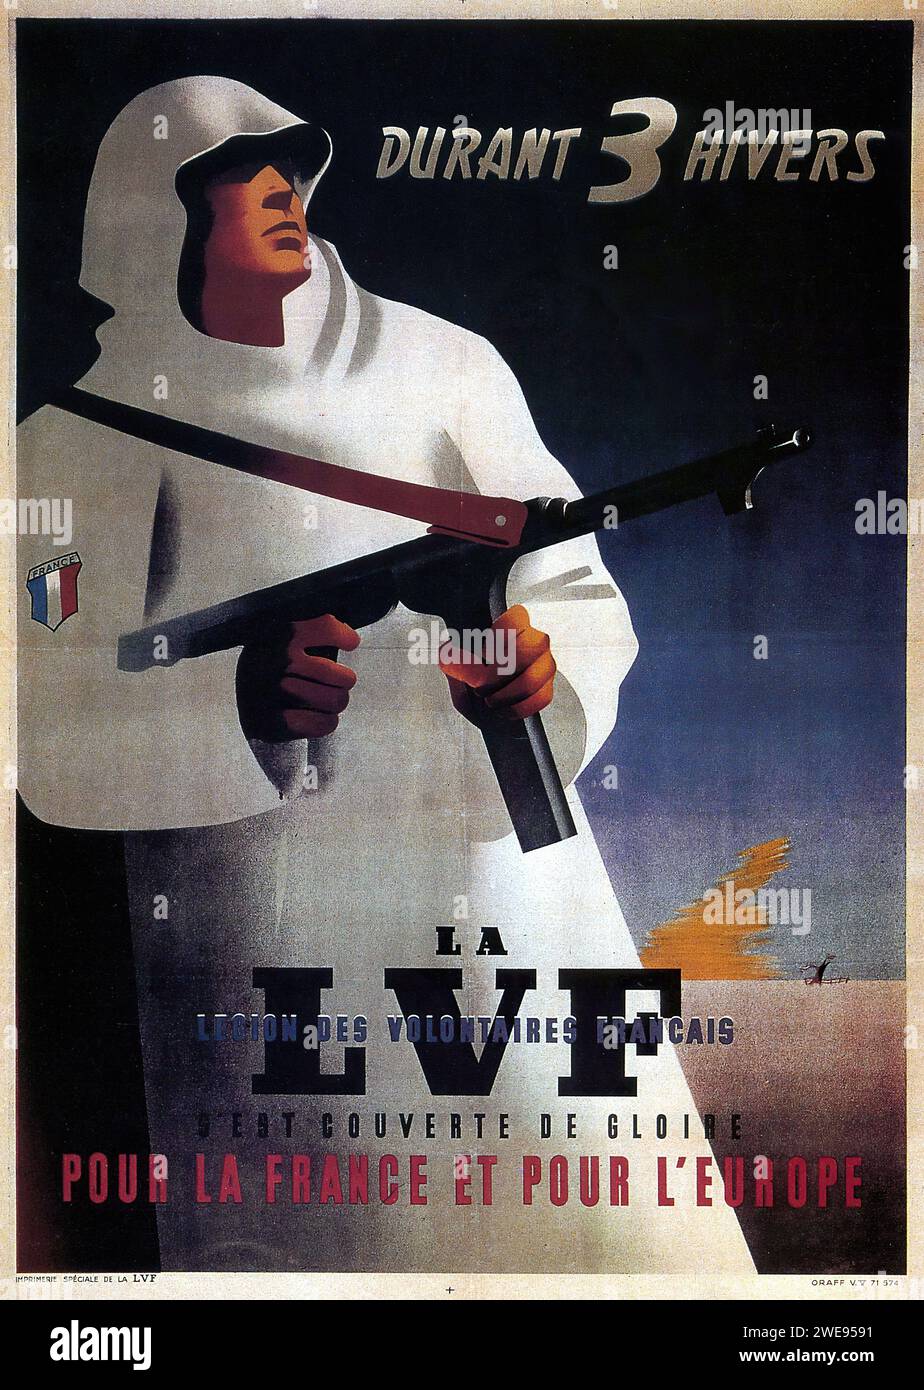 'DURANT 3 HIVERS LA L.V.F. LÉGION DES VOLONTAIRES FRANÇAIS EST COUVERTE DE GLOIRE POUR LA FRANCE ET POUR L'EUROPE' ['DURING 3 WINTERS THE L.V.F. FRENCH VOLUNTEERS LEGION IS COVERED IN GLORY FOR FRANCE AND FOR EUROPE'] Vintage French Advertising featuring a soldier in winter gear holding a weapon. The design is in a propagandistic style typical of the mid-20th century, emphasizing nationalism and duty. Stock Photo